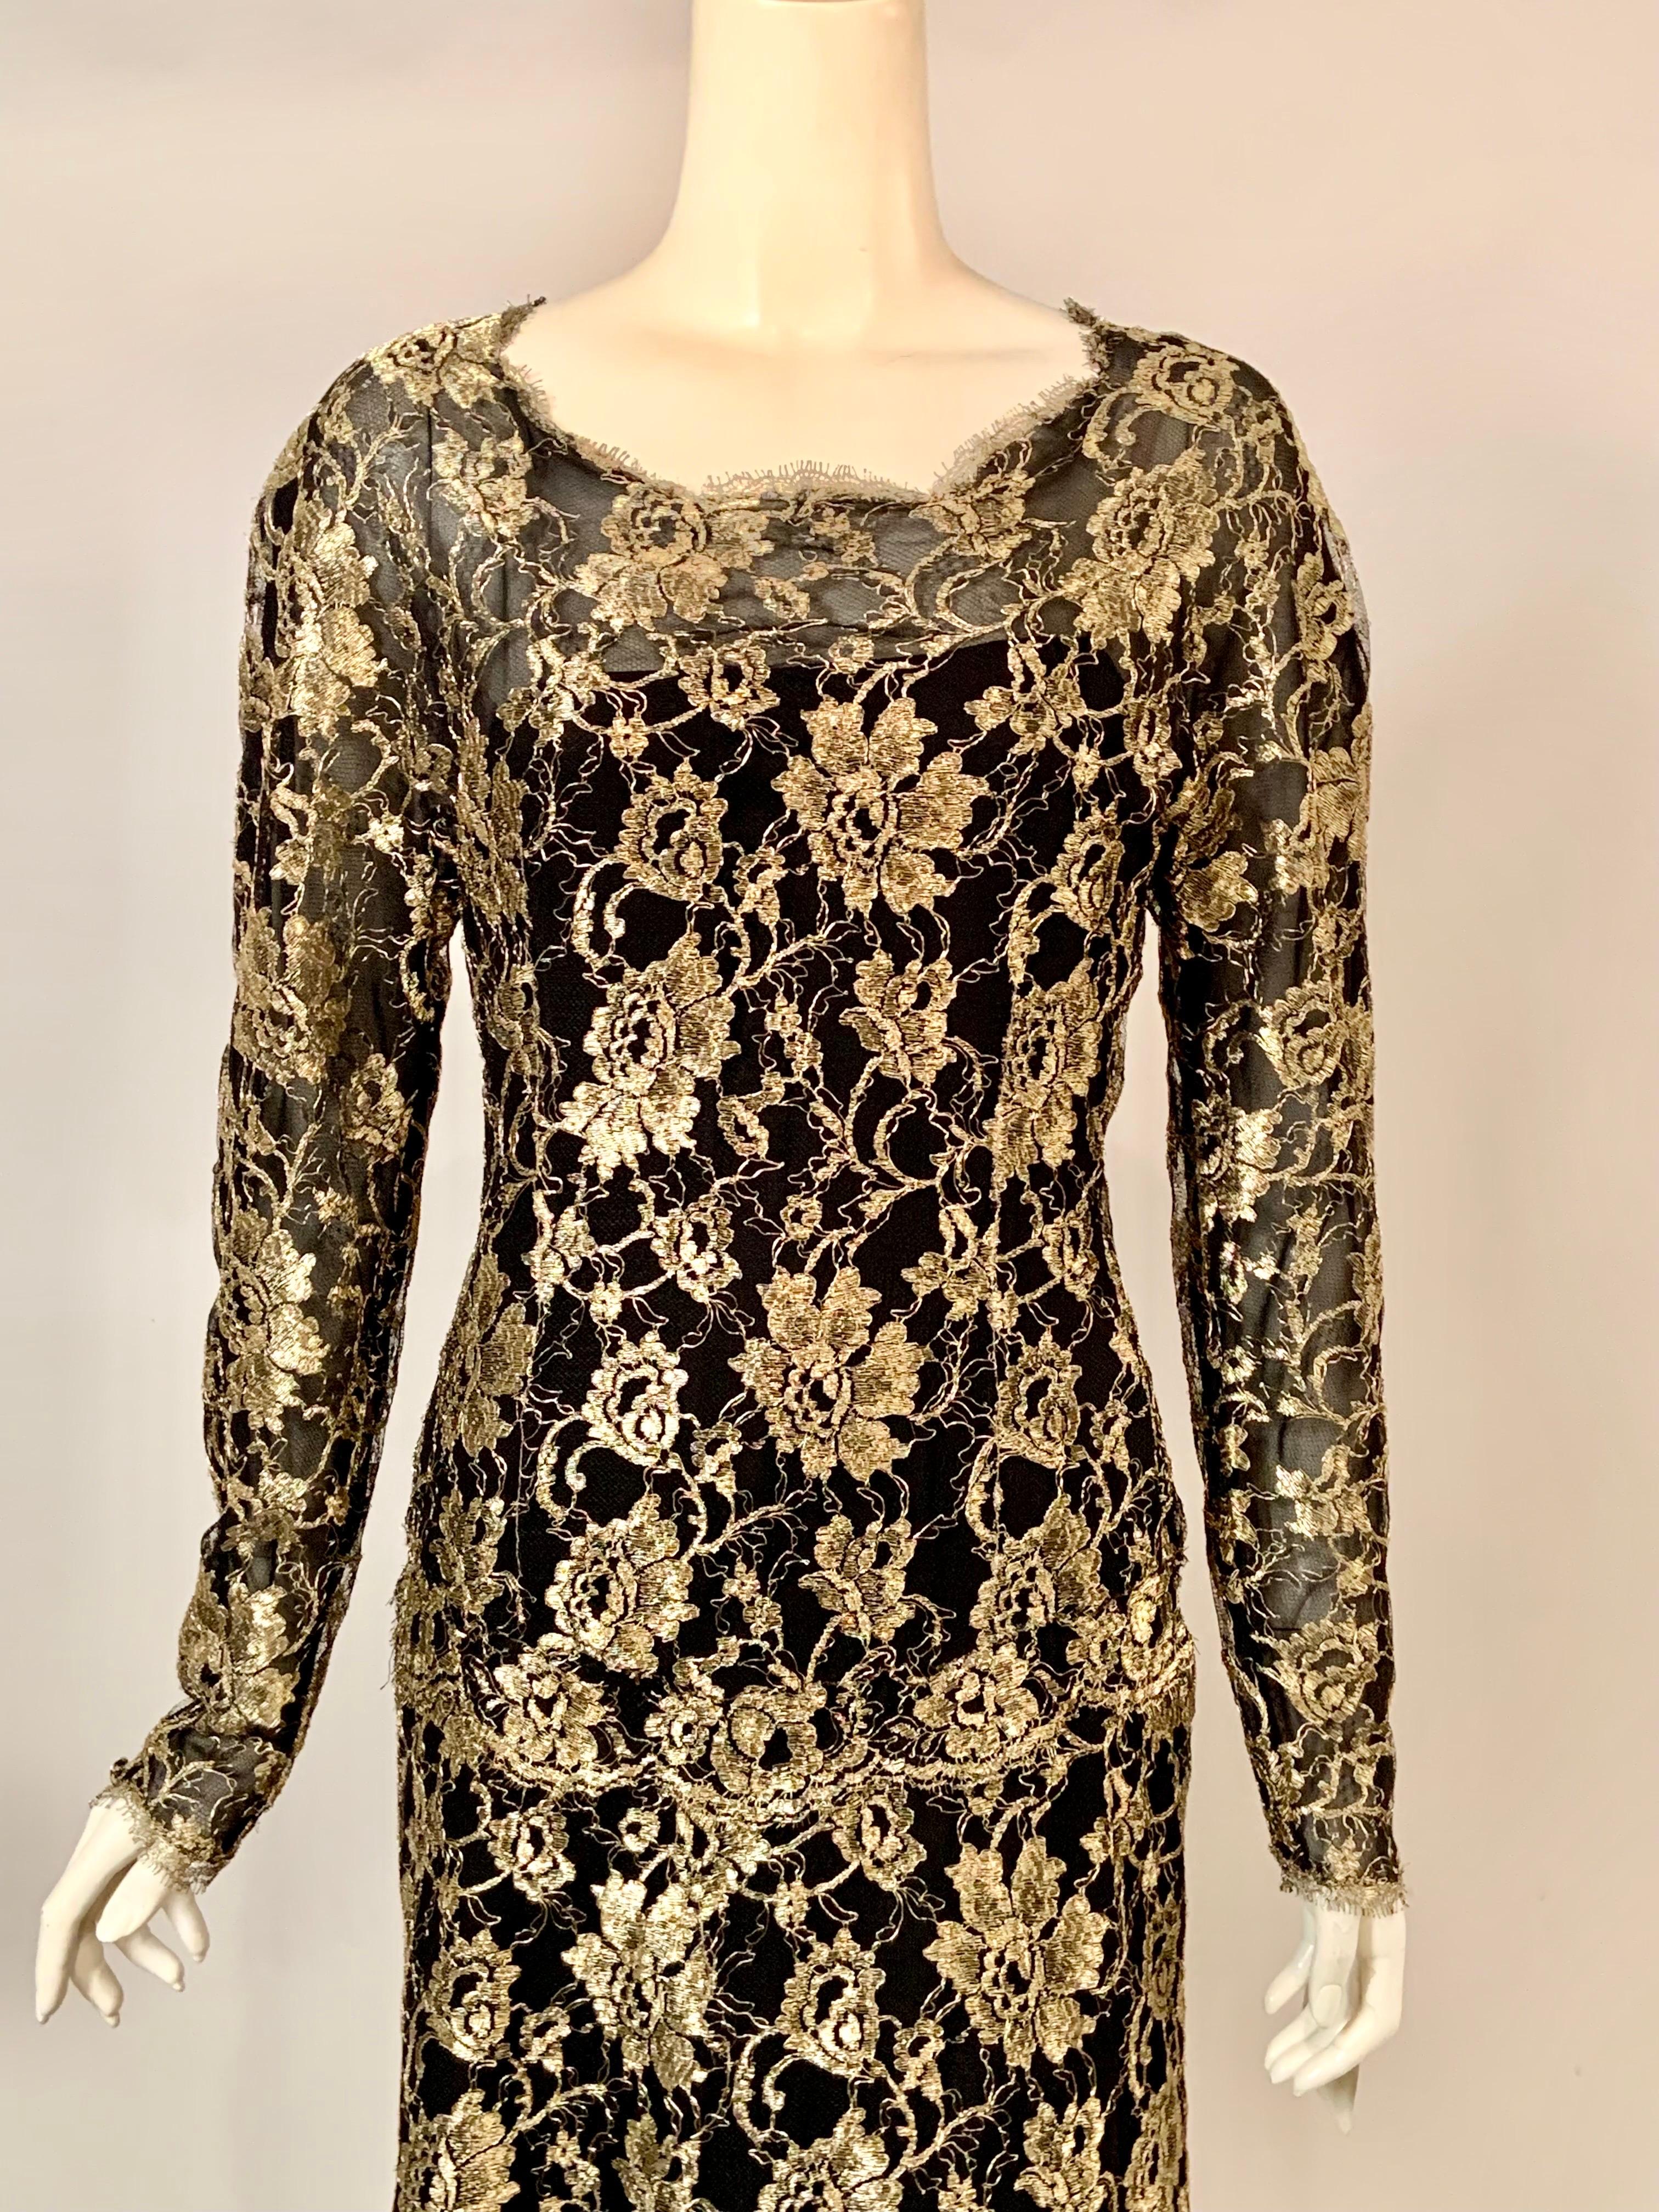 Karl Lagerfeld designed this glamorous Chanel gold and black lace evening gown with a train in 1986.  The dress has a round neckline, a dropped waistline, long sleeves, and covered buttons and loops at the center back above the trained skirt.  The